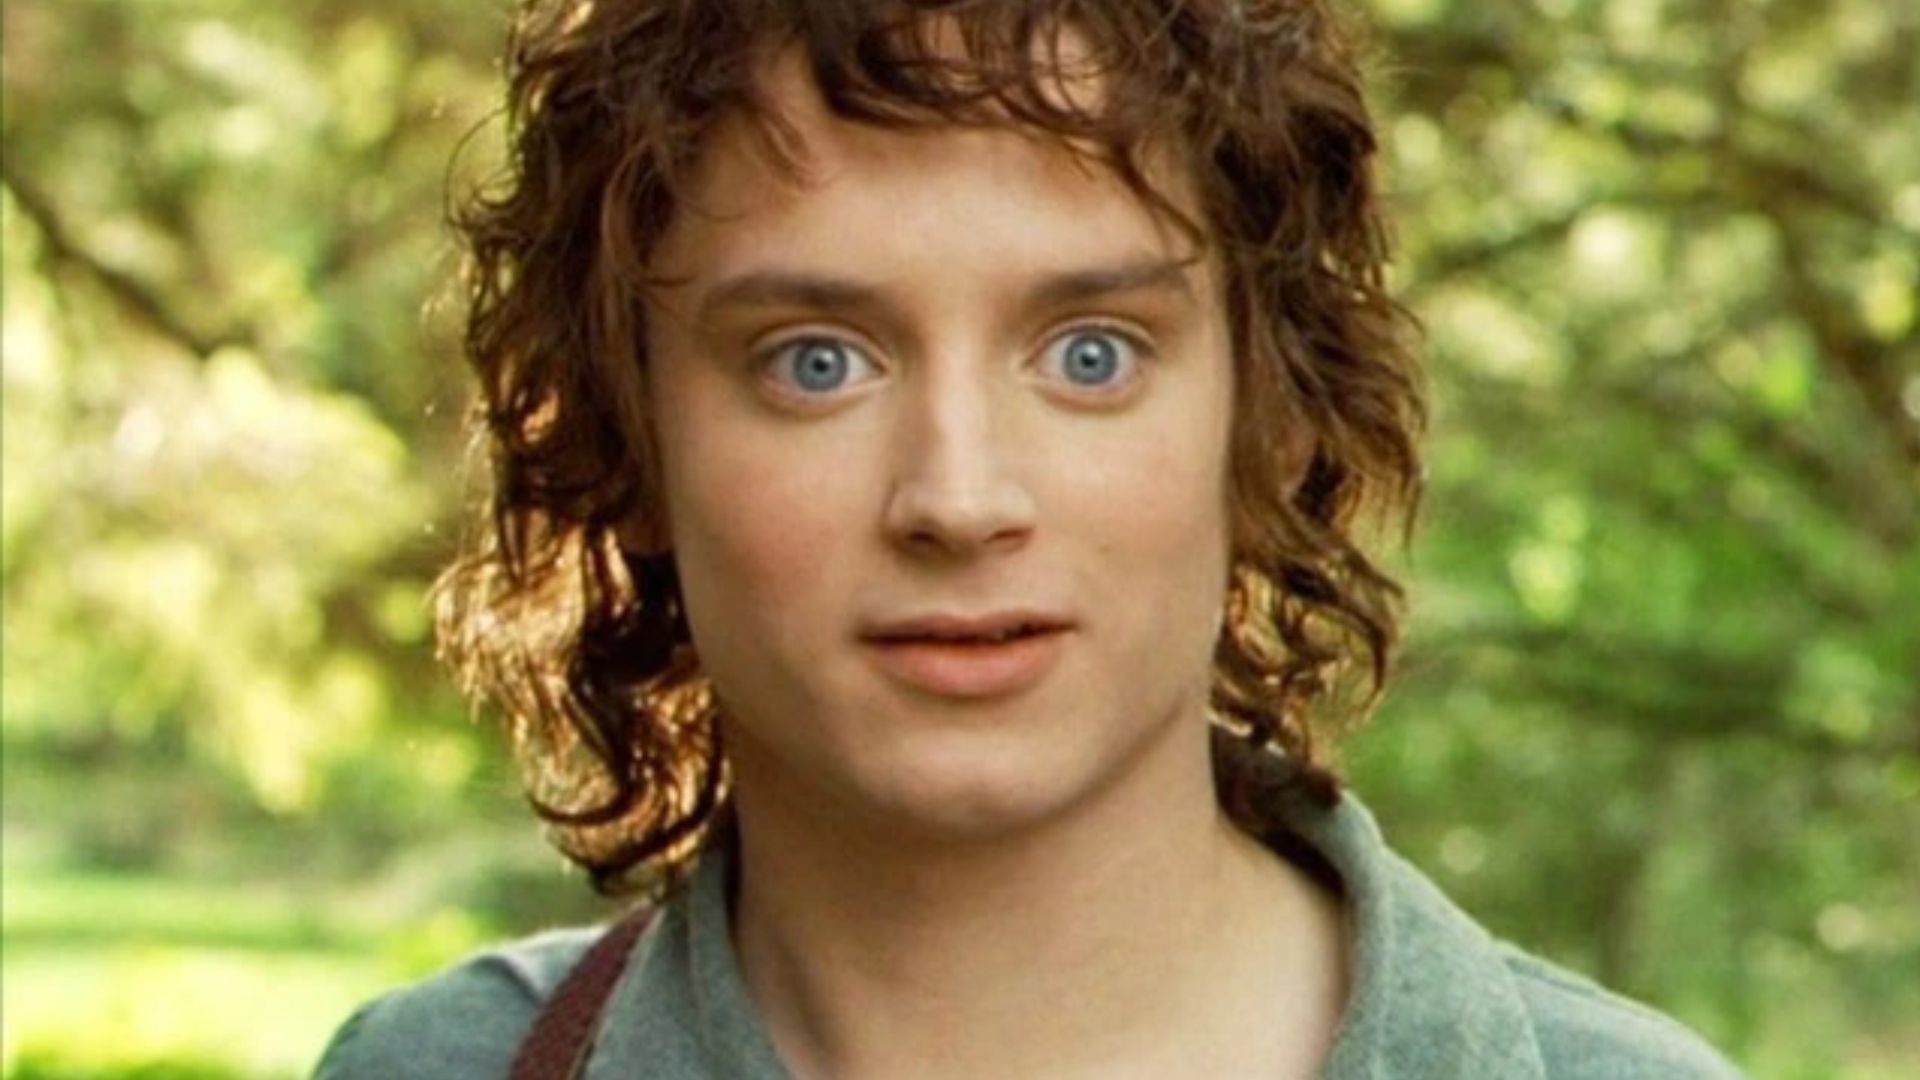 Elijah Wood With Surprised Expressions